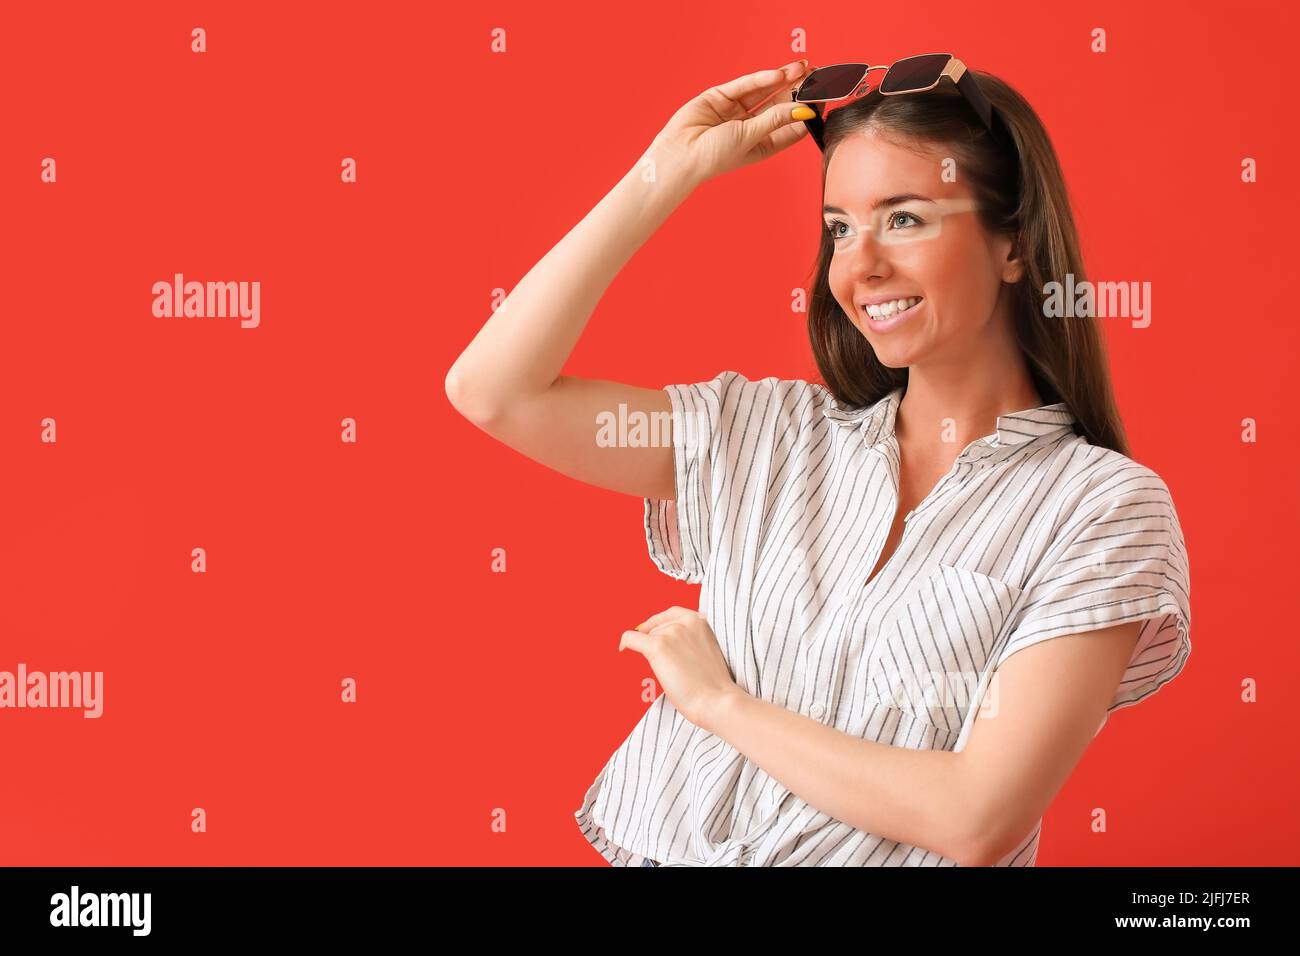 Happy young woman with sun tanned skin and sunglasses on red background Stock Photo